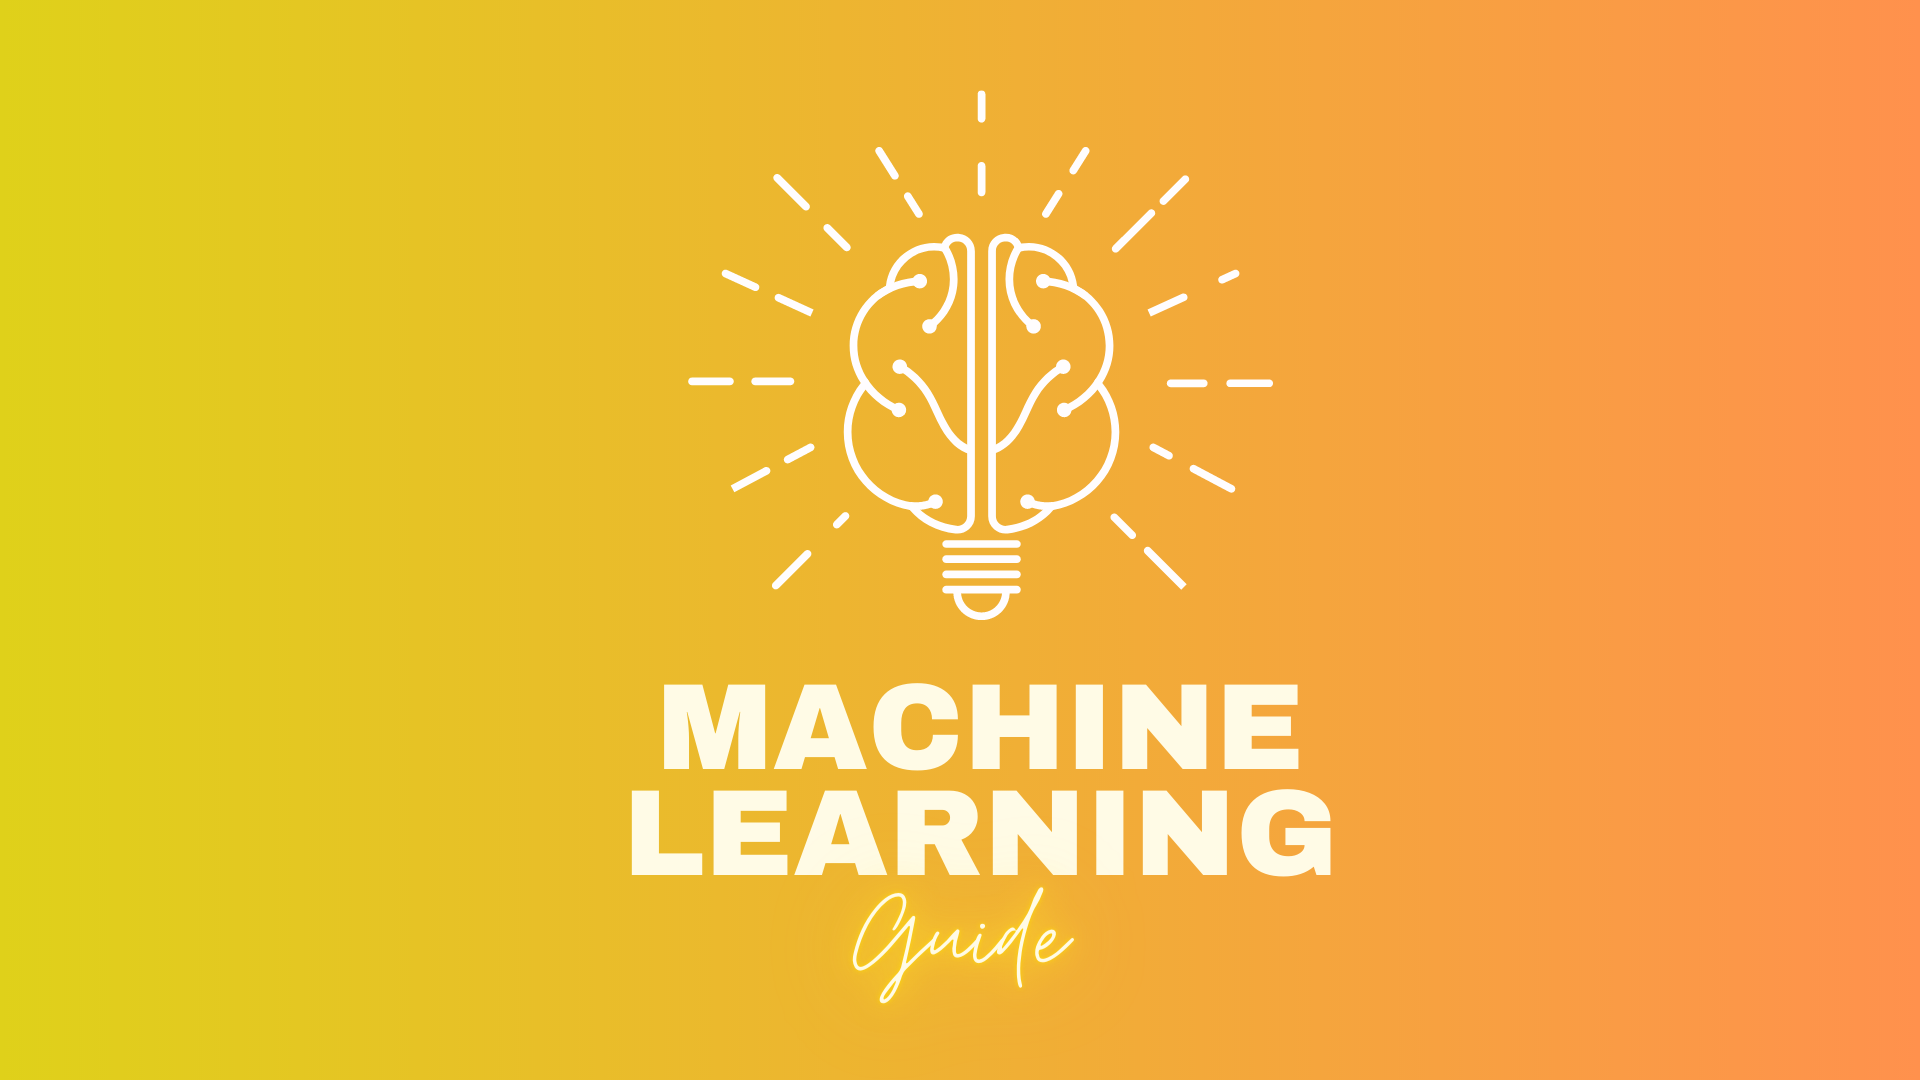 Machine learning guide on a blended yellow and orange background